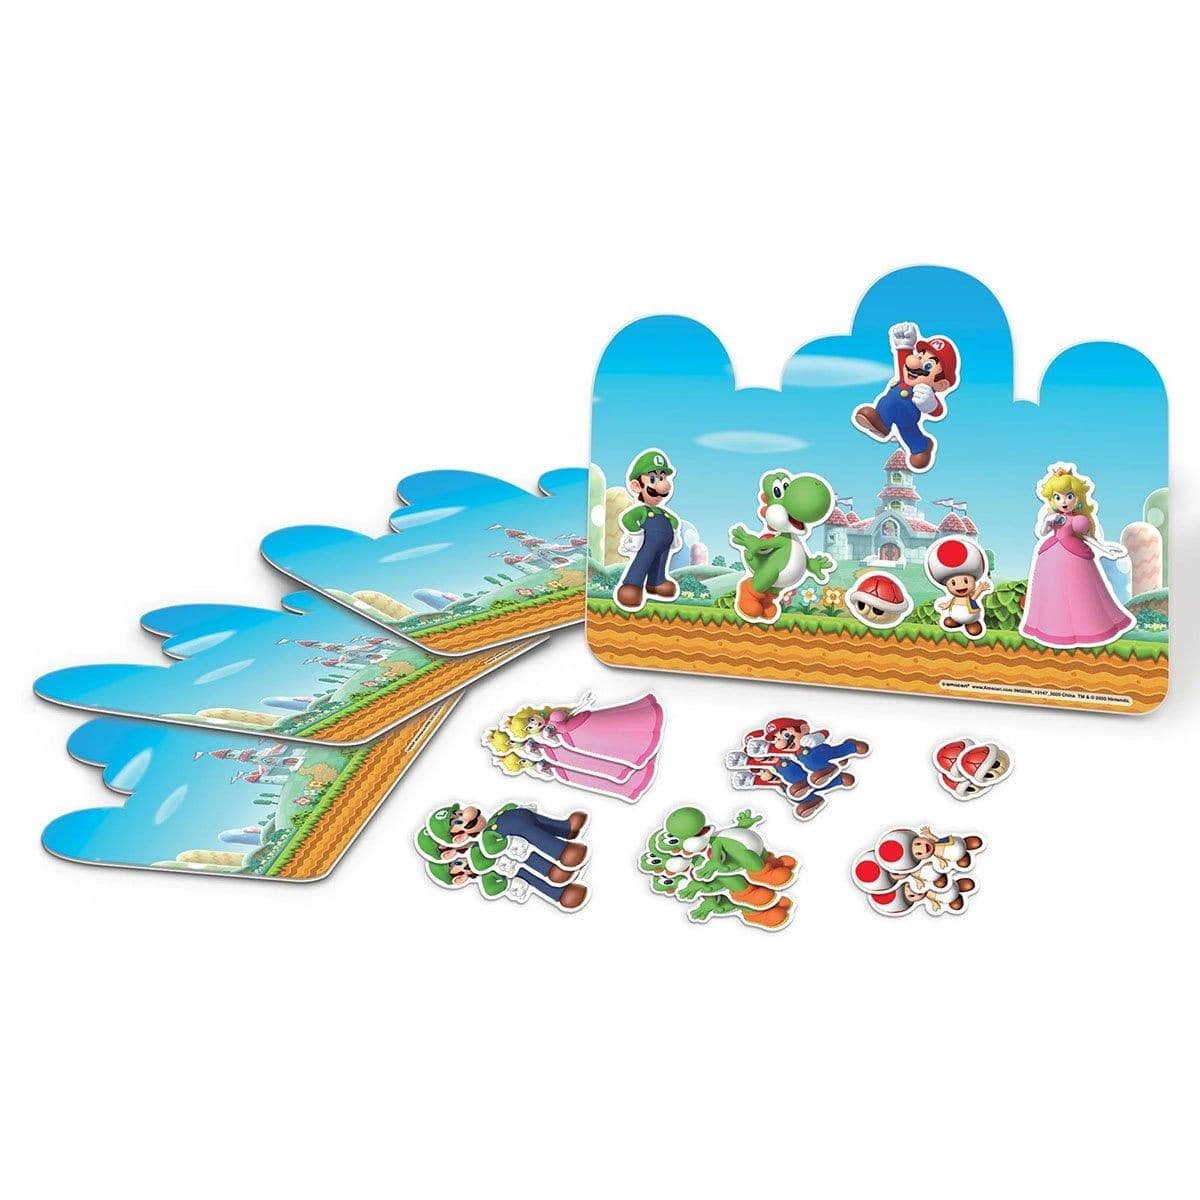 Buy Kids Birthday Super Mario Craft Kit, 4 Count sold at Party Expert